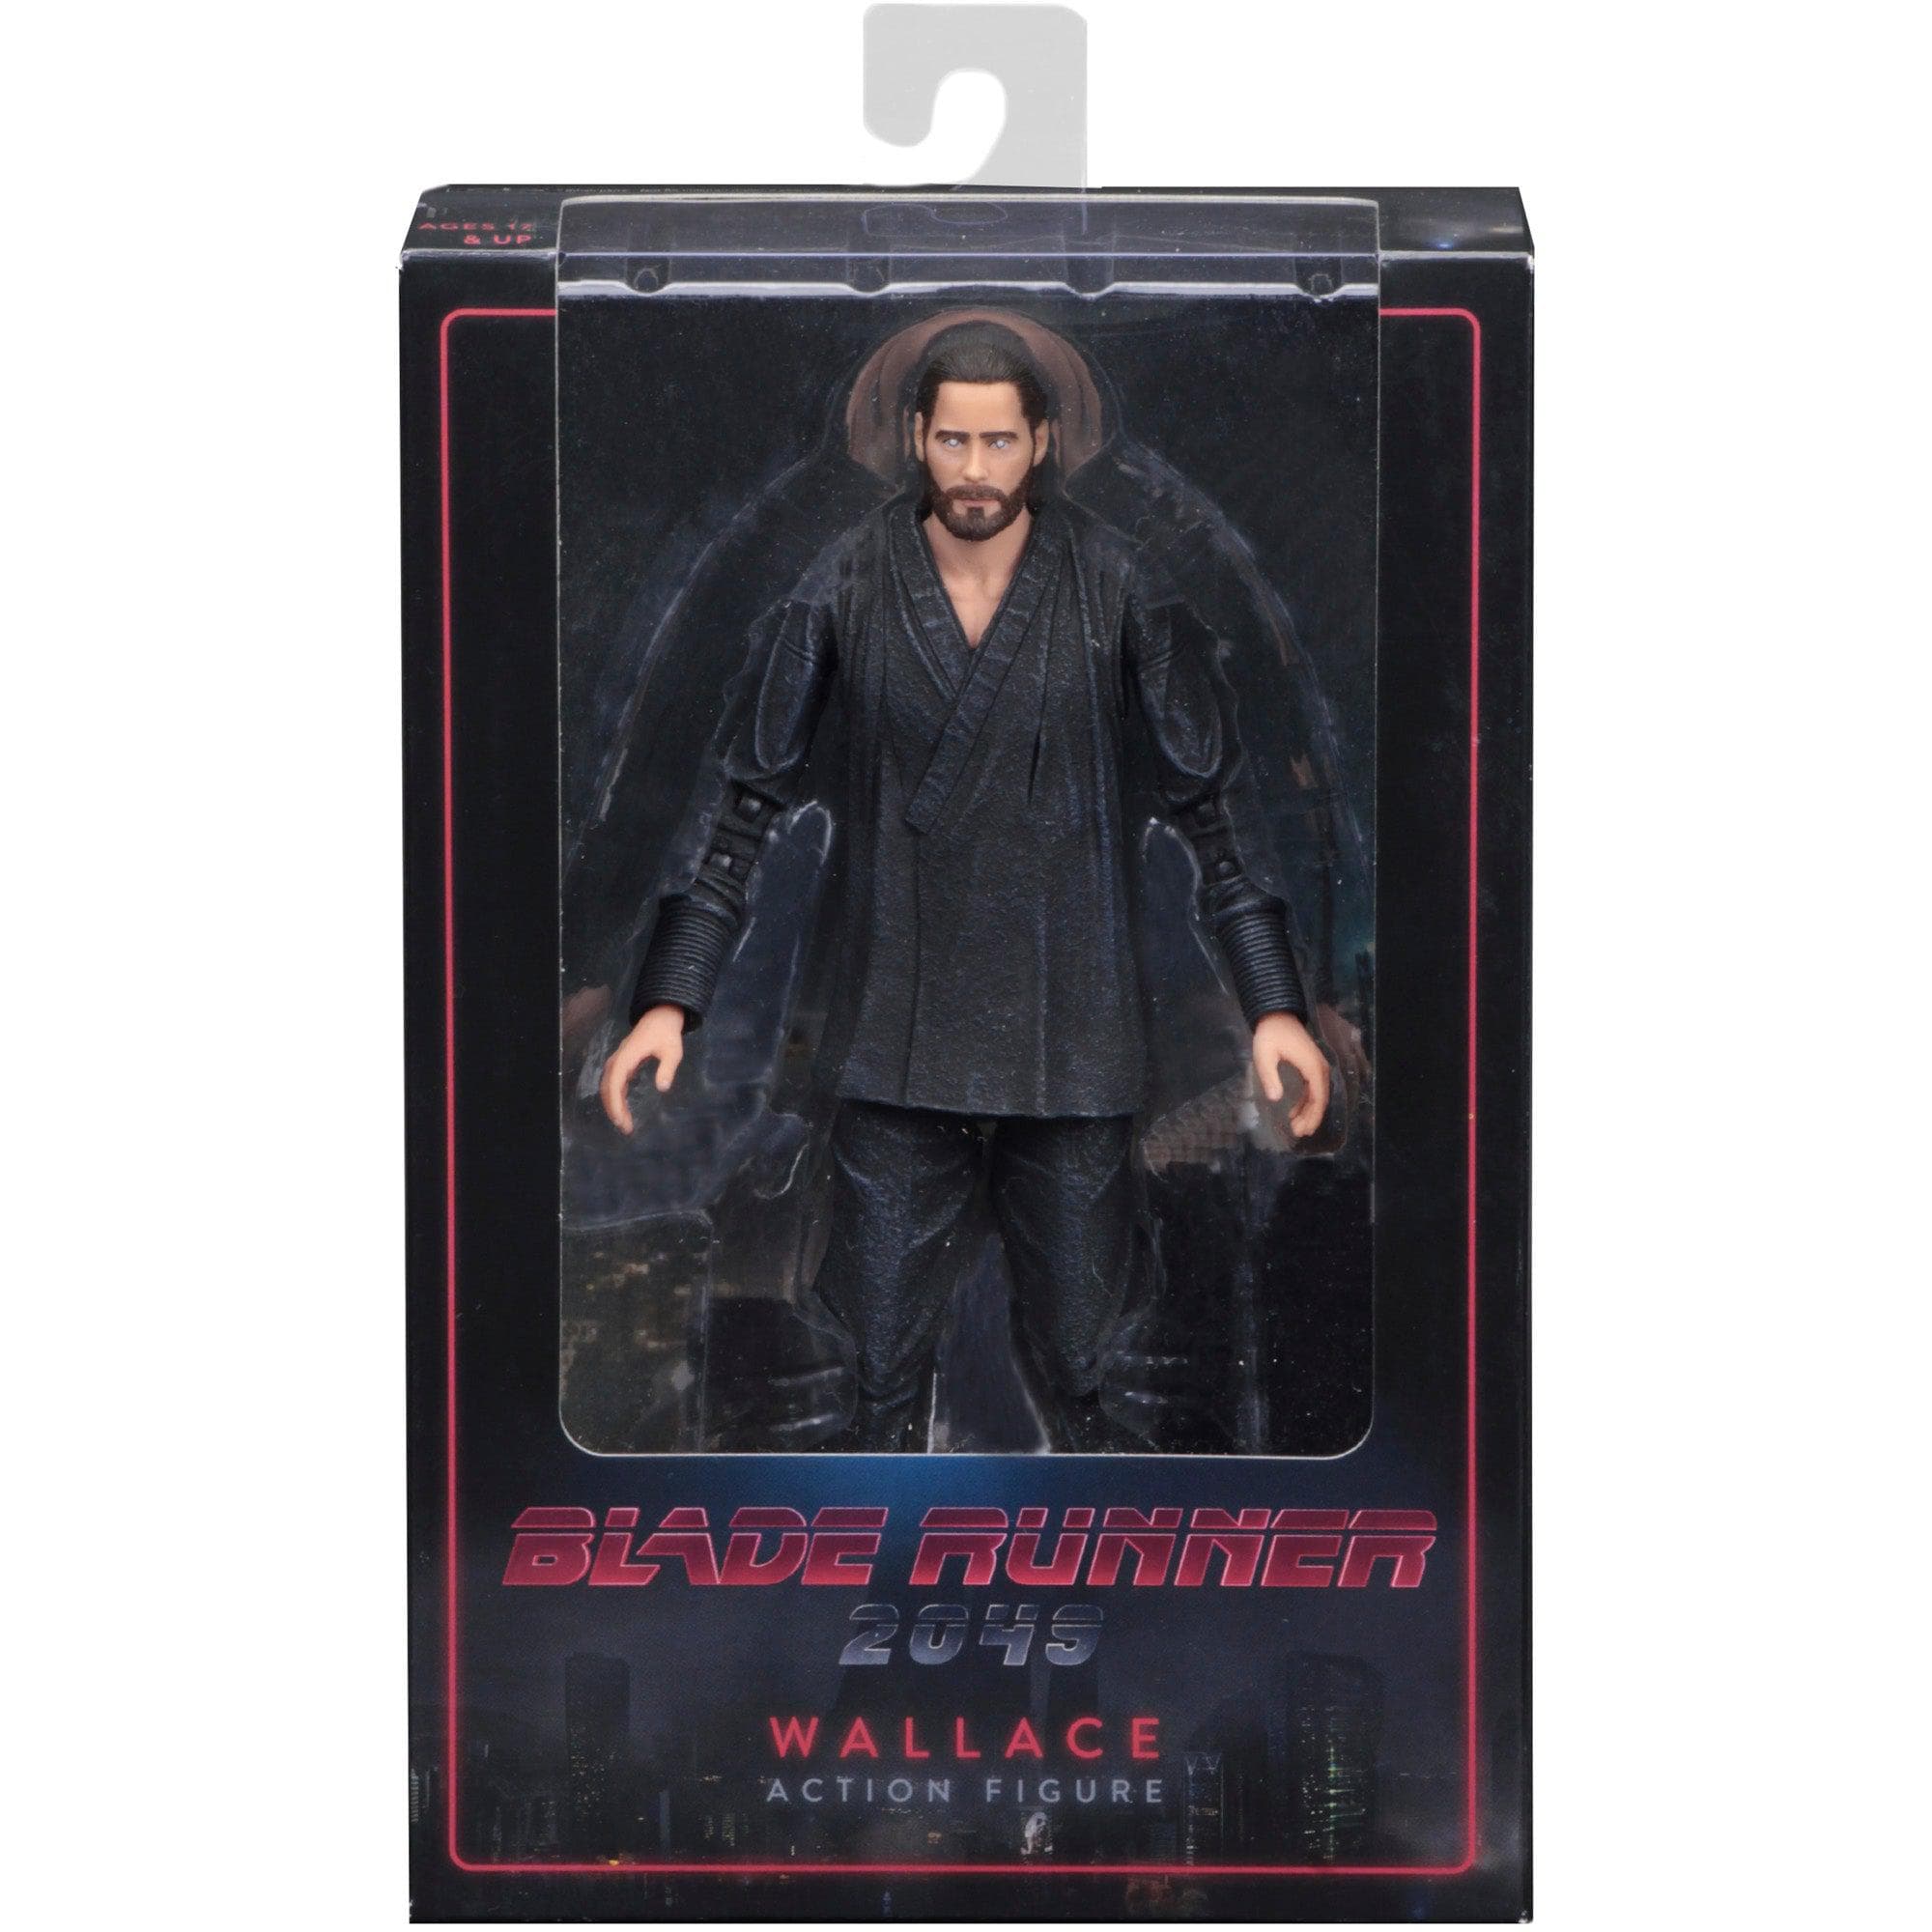 NECA - Blade Runner 2049 - 7" Scale Action Figure - Series 2 Wallace - costumes.com